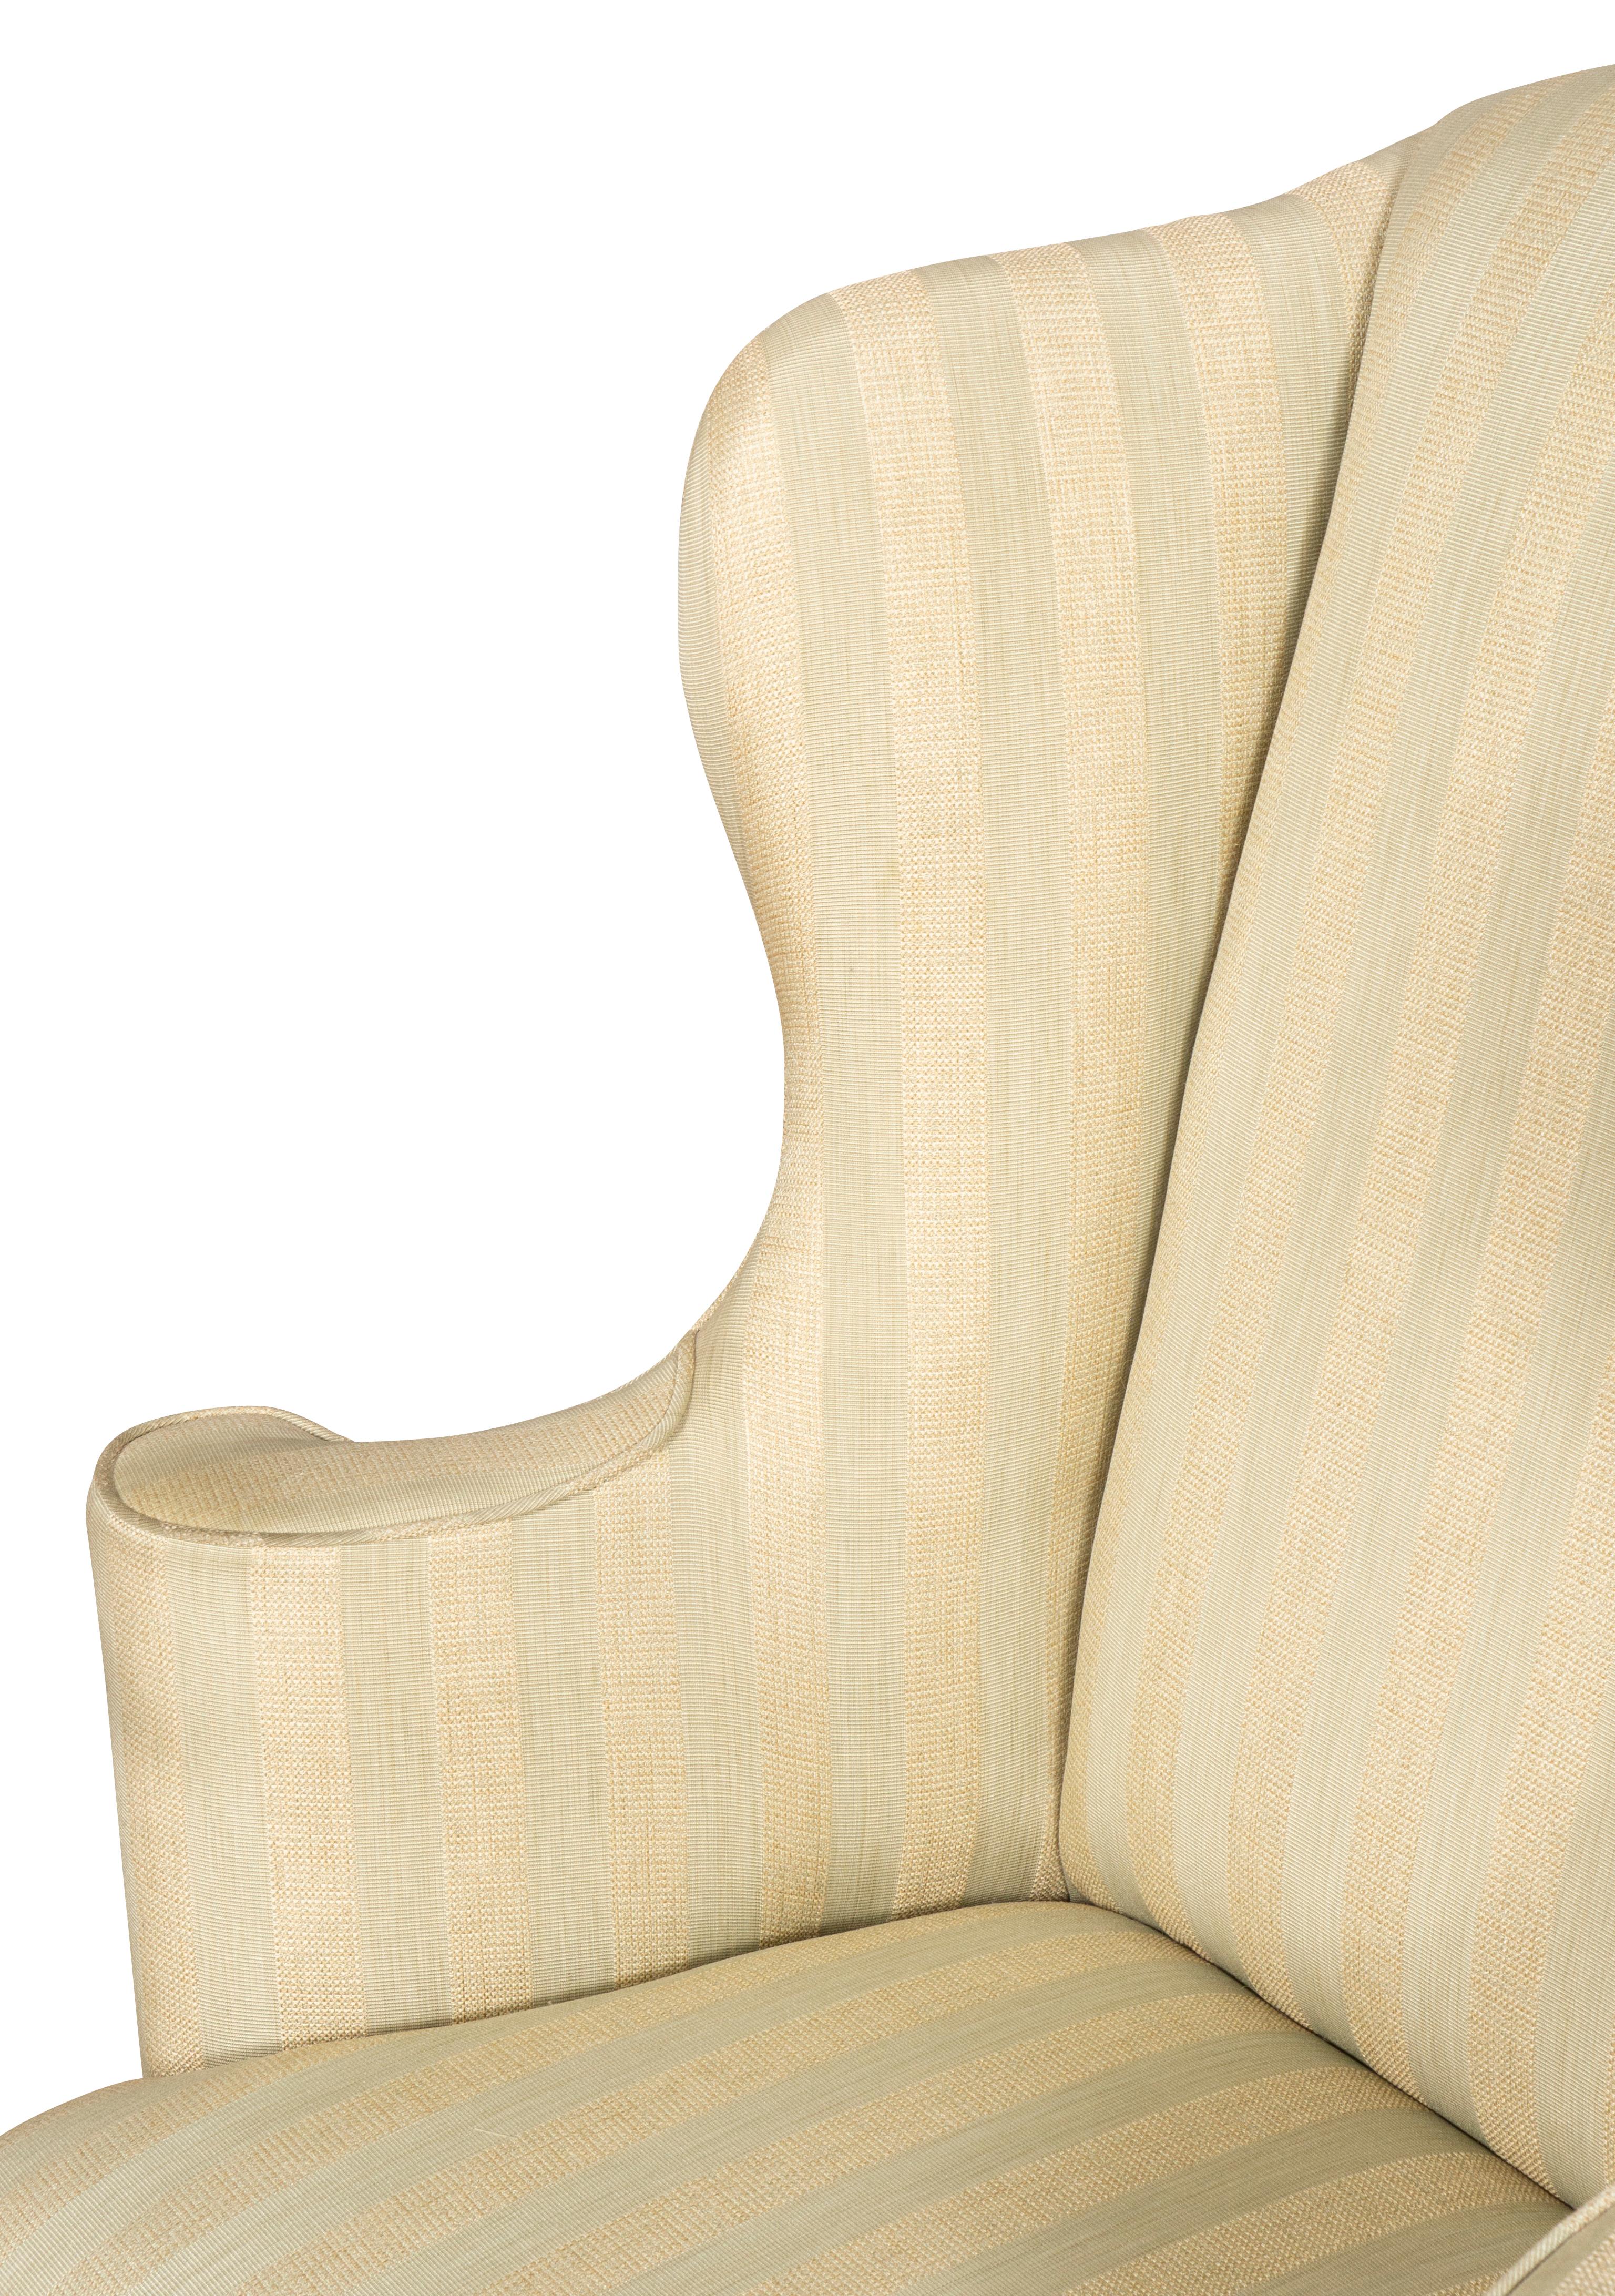 Massachusetts Queen Anne Mahogany Wing Chair 8